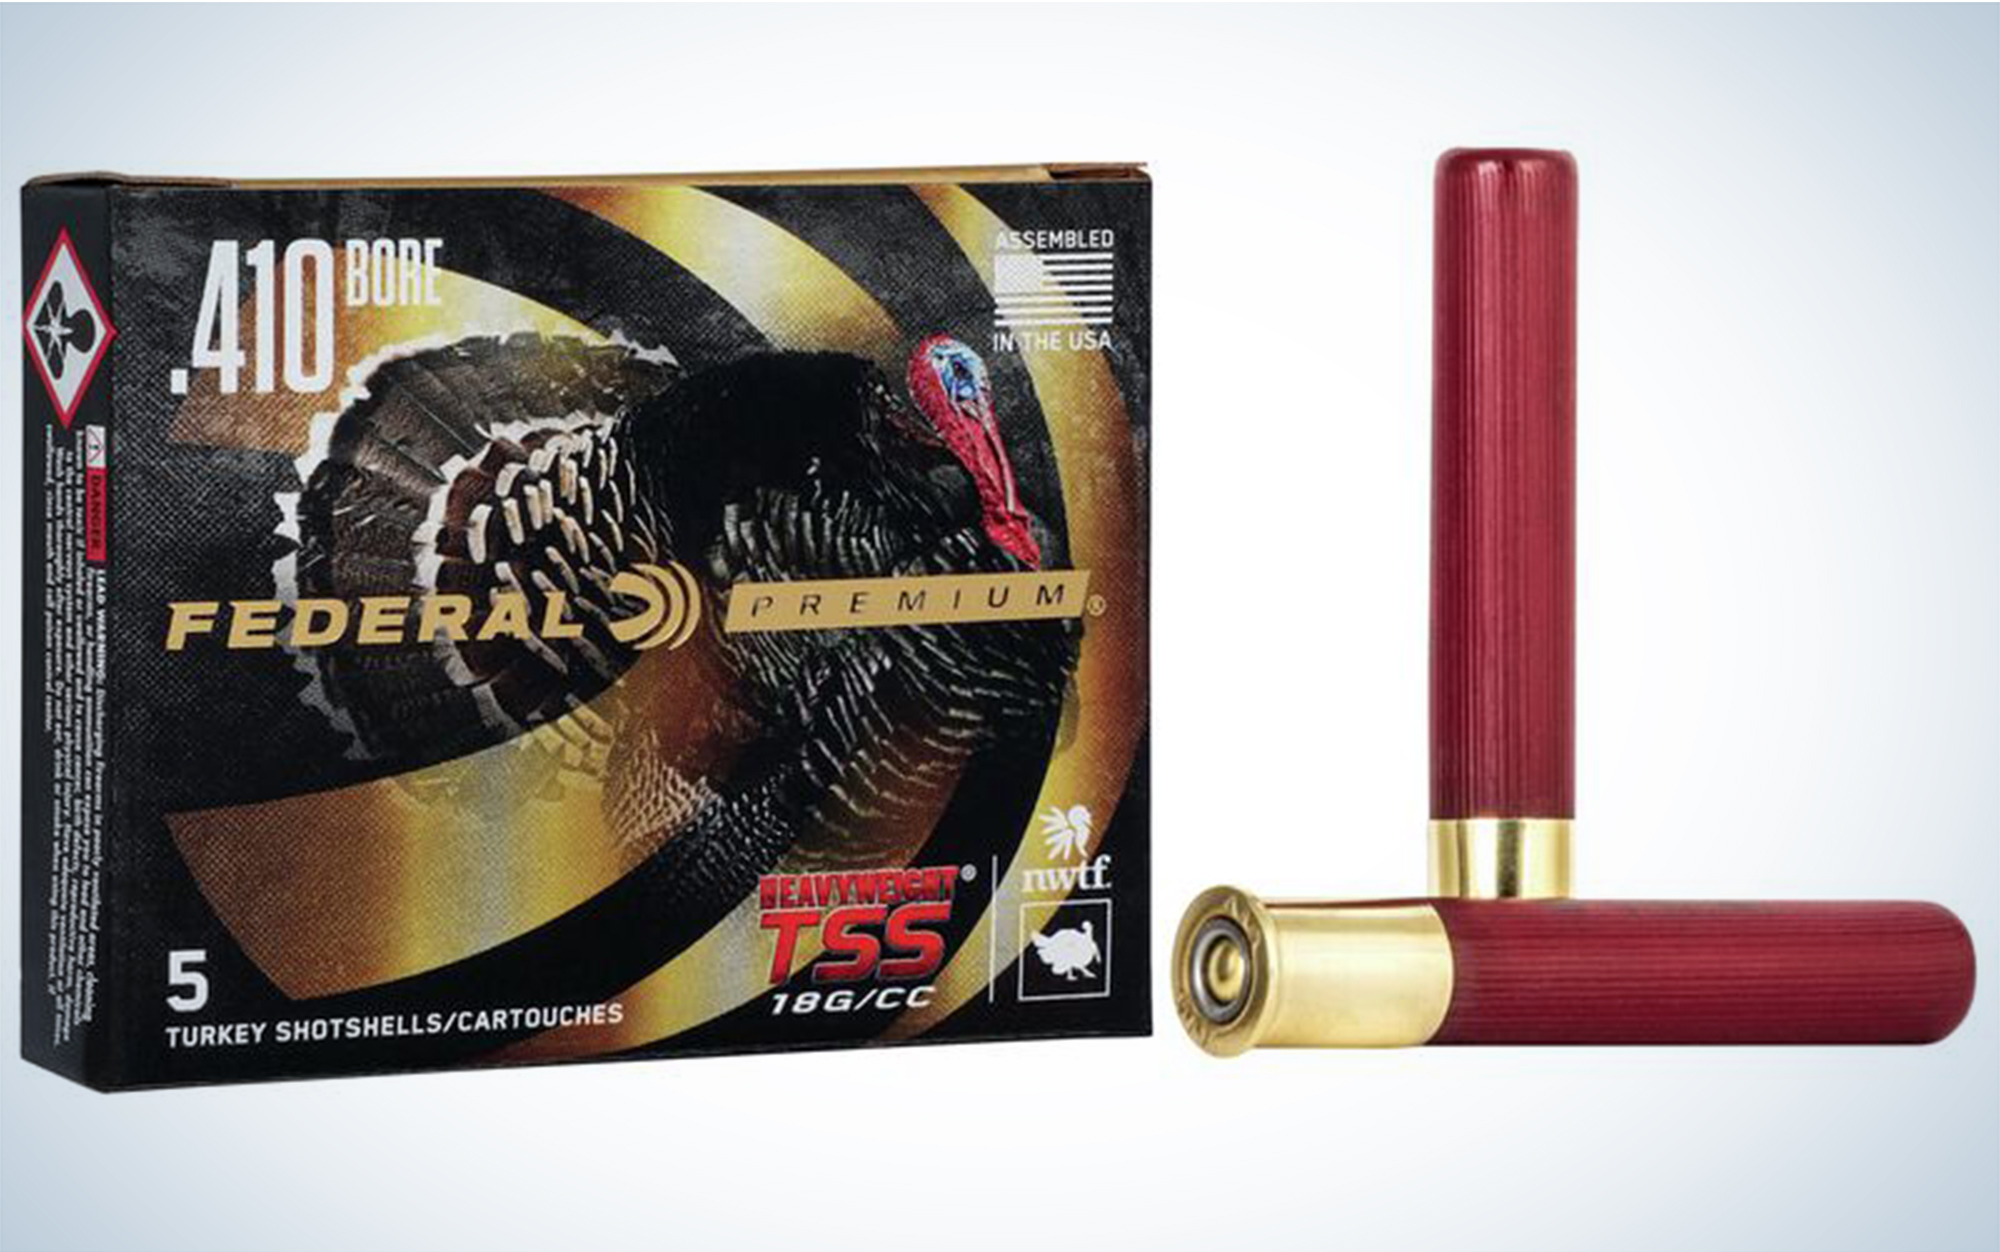 The Federal HeavyweightÂ are one of the best .410 turkey loads.